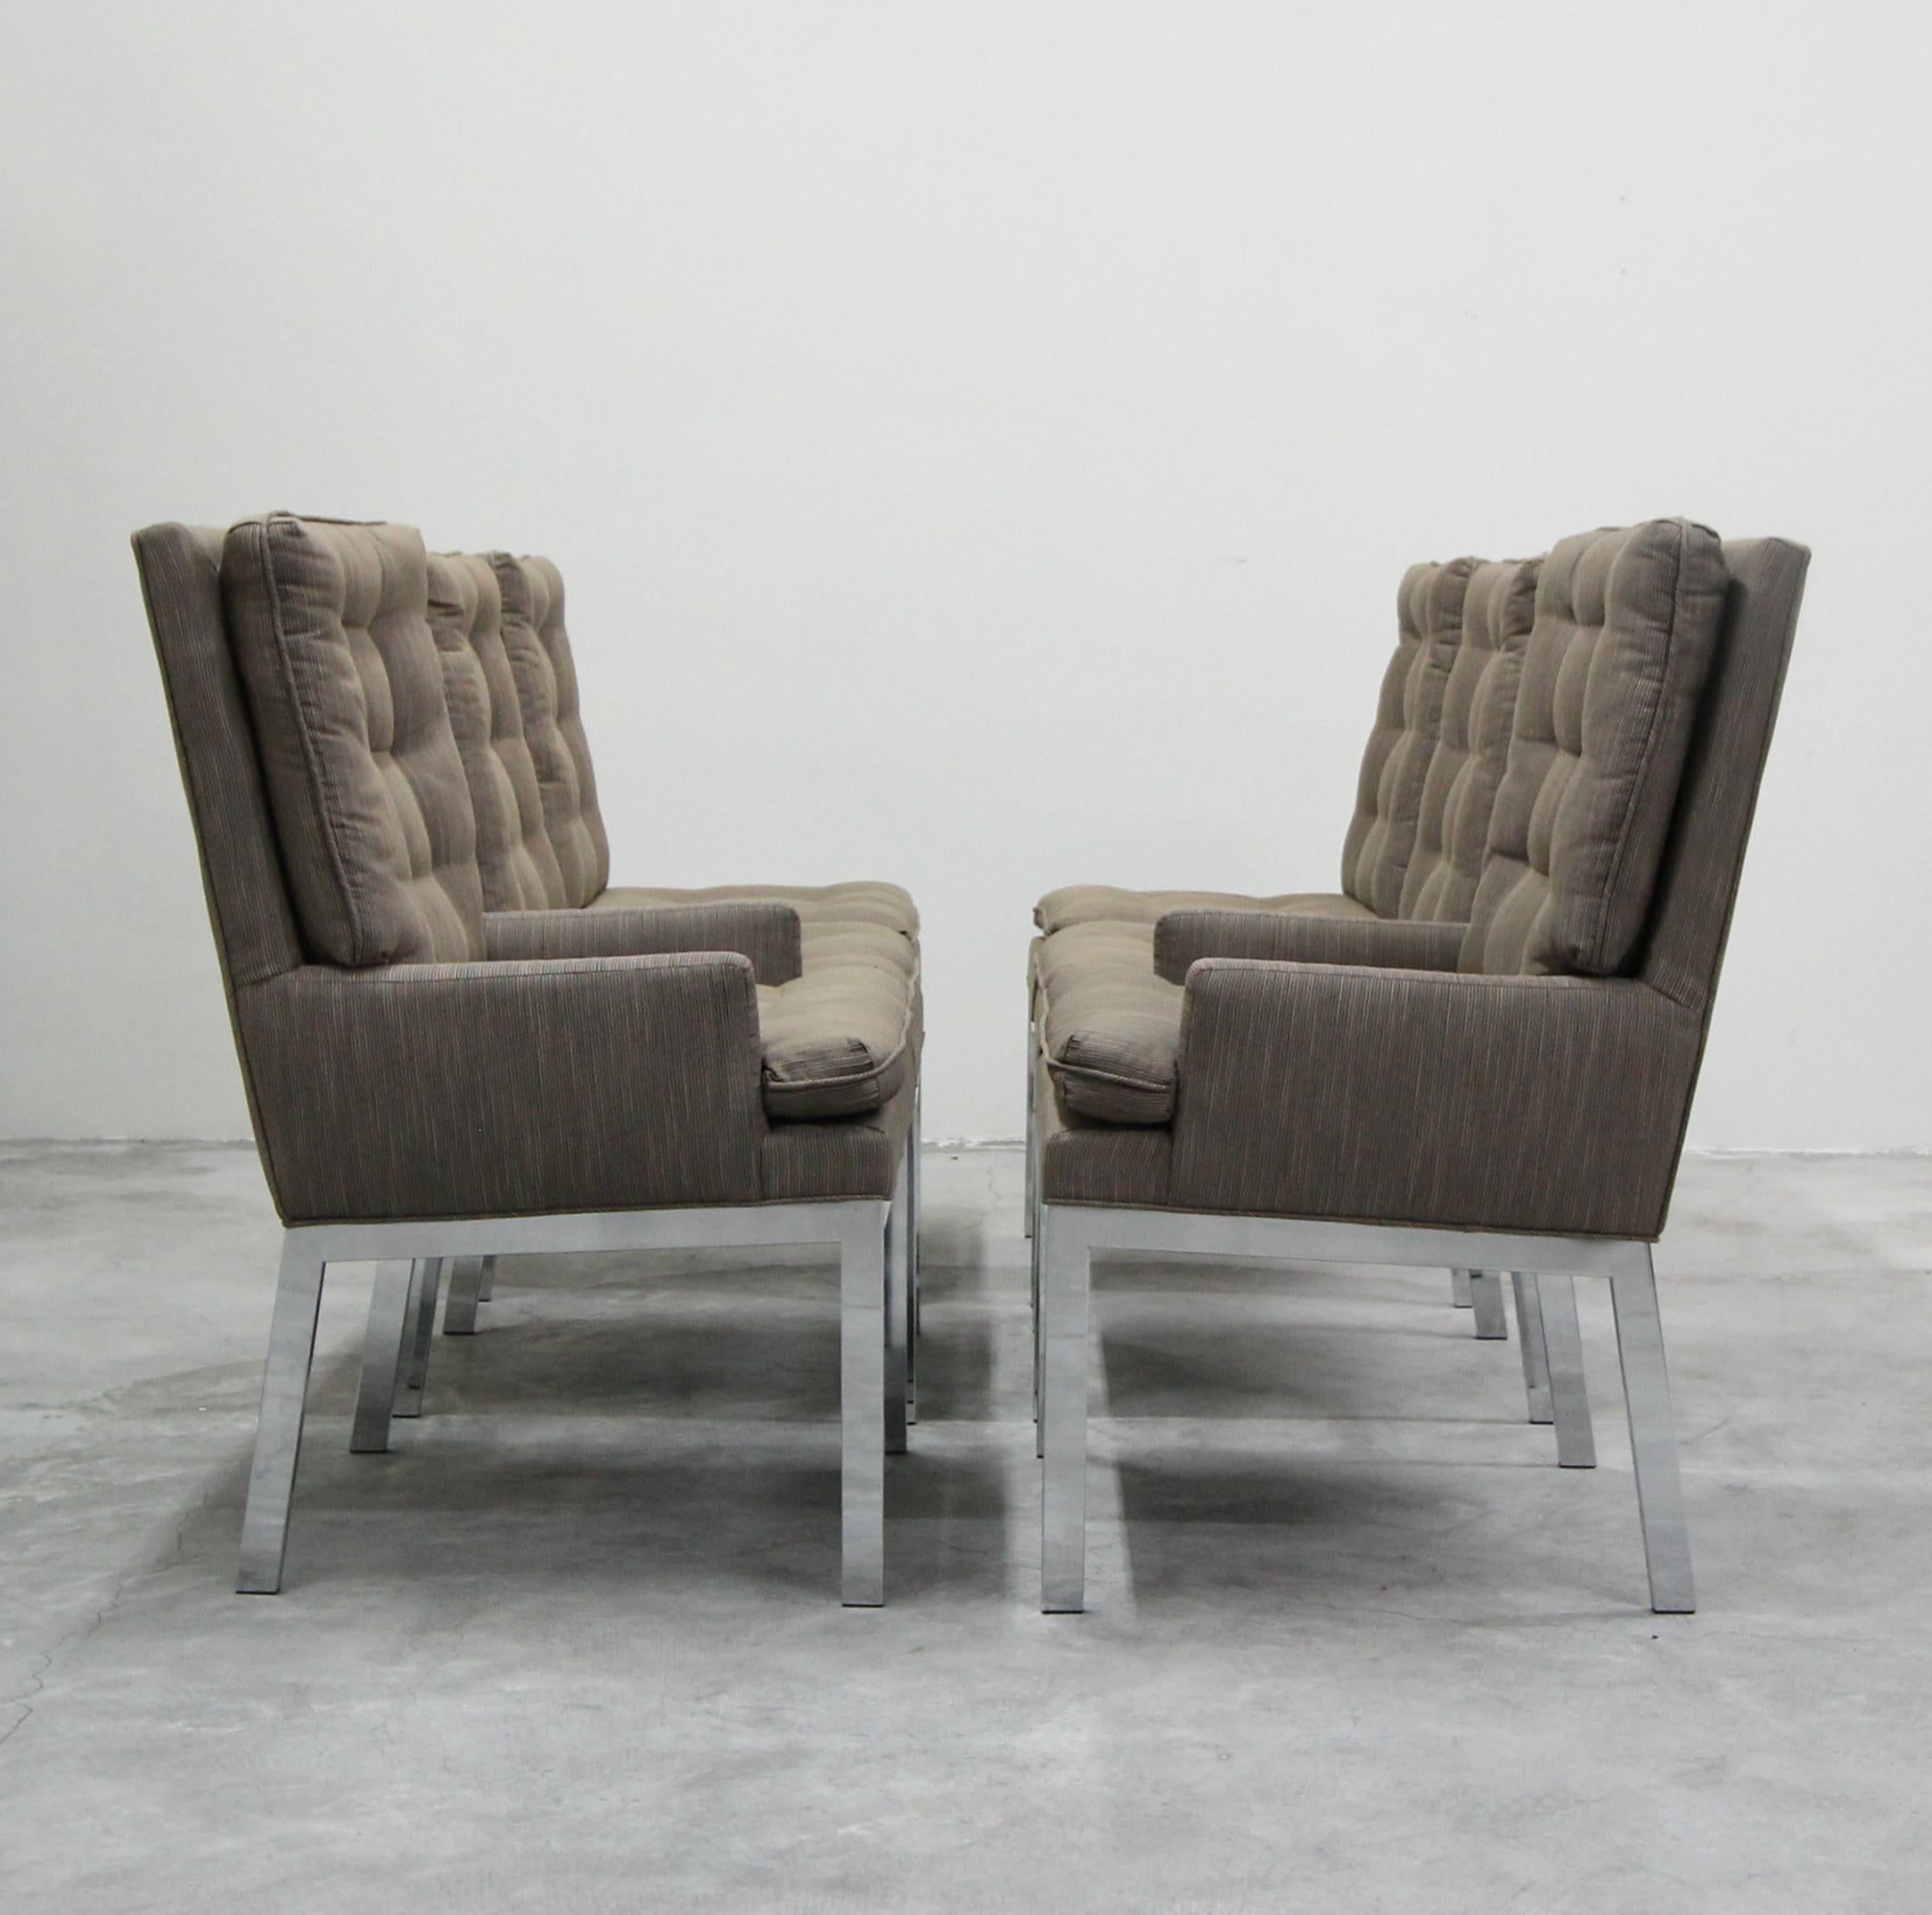 Exquisite set of chrome dining chairs by Design Institute America (DIA). Mirrored chrome, modern beauties. Nicely angled legs. Recently upholstered, upholstery is in good used condition overall.